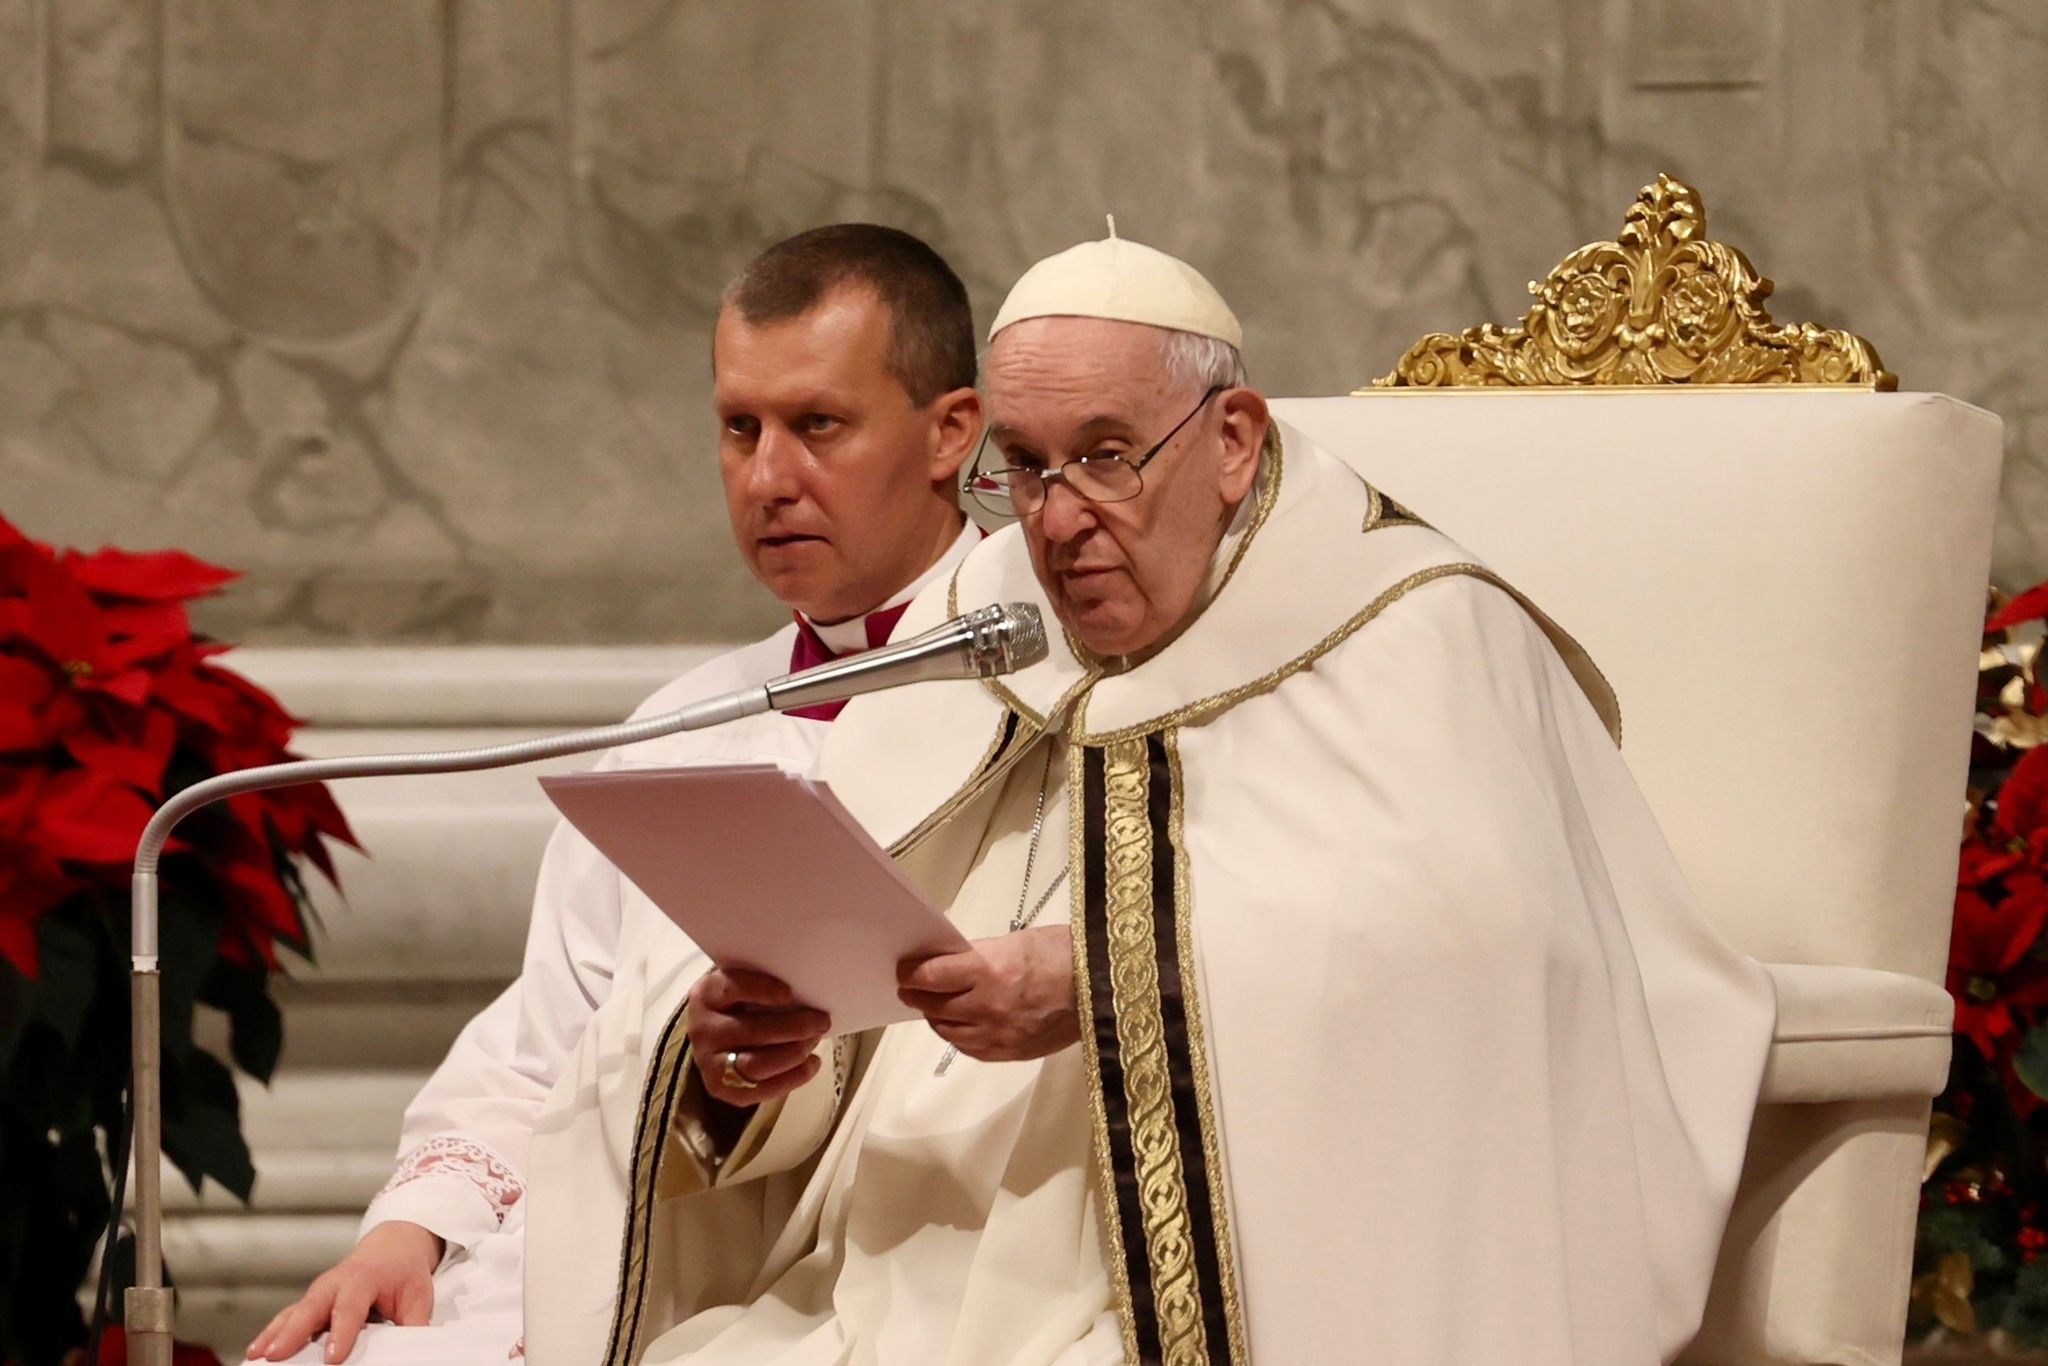 Pope Francis on Christmas: The manger is a sign that God is with us and loves us